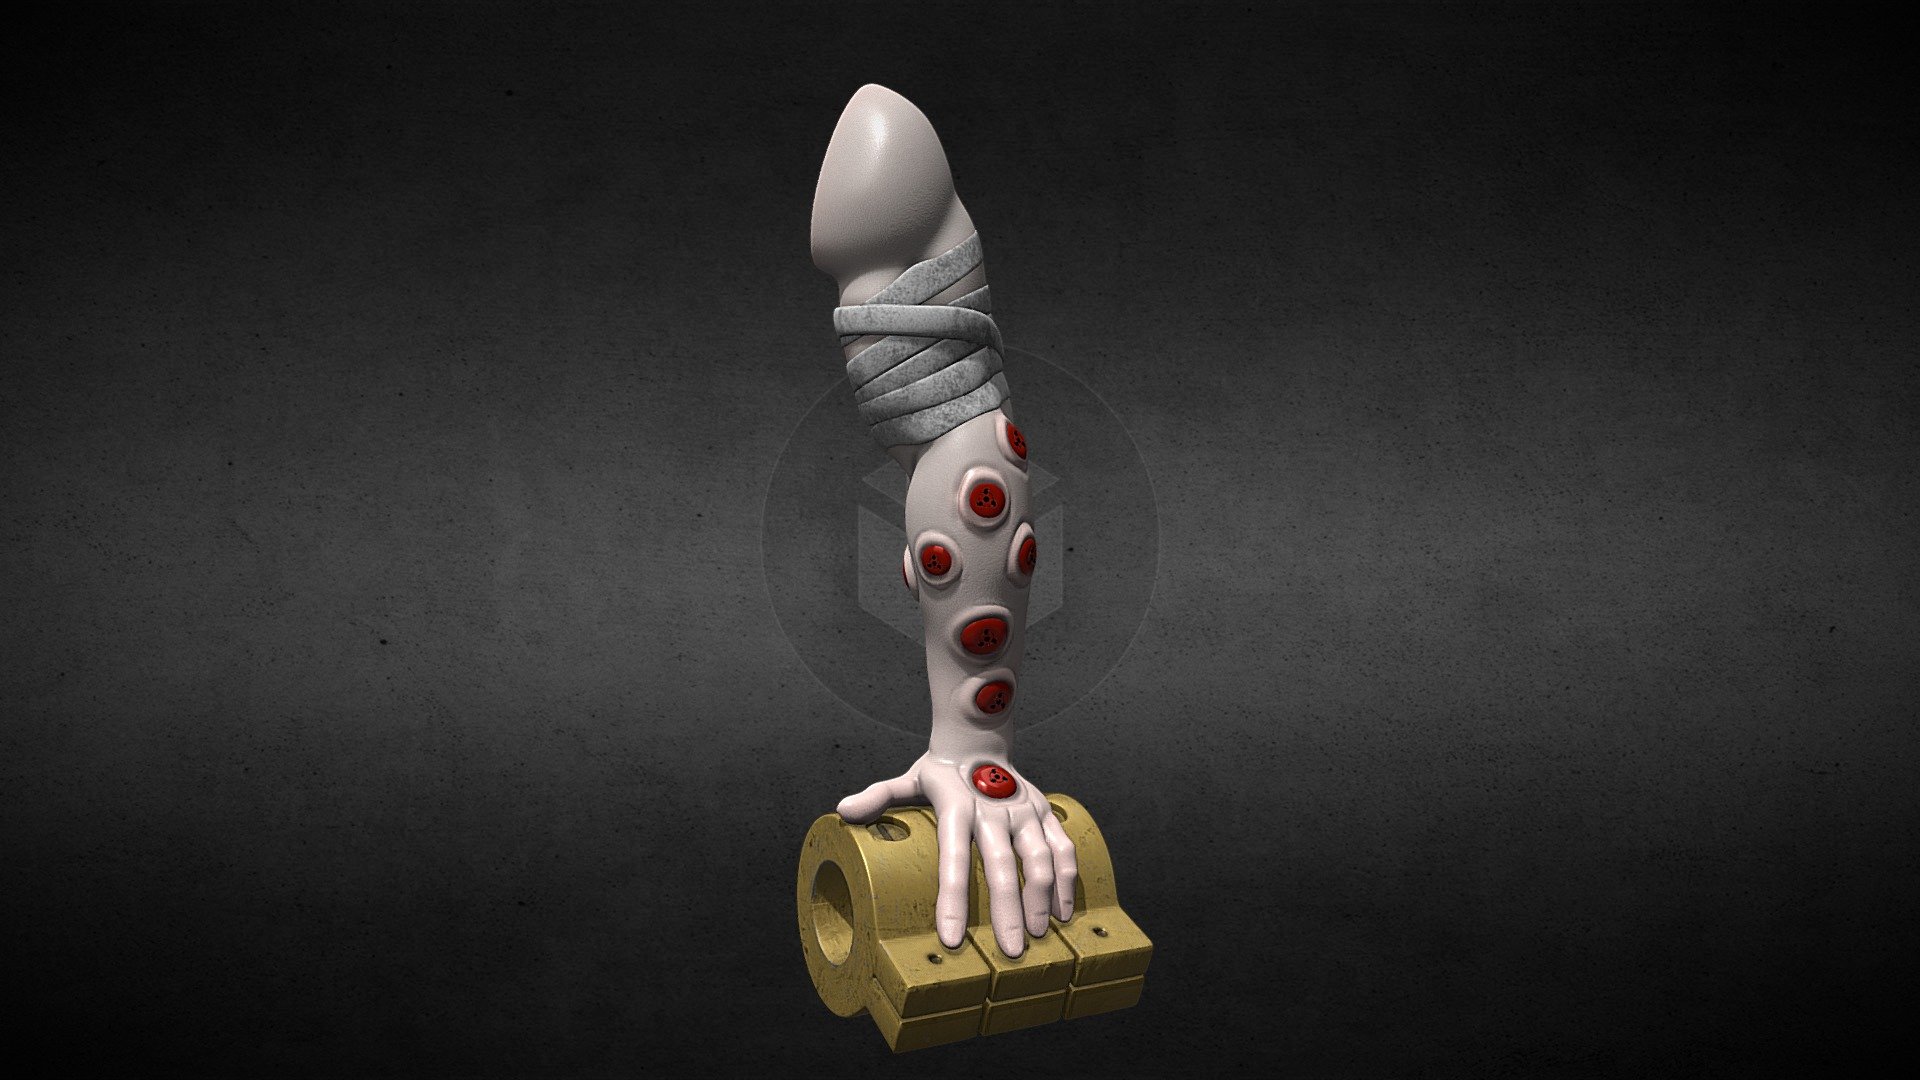 Danzo Sharigan Arm 
A quick 3D sculp of sharingan arm of Danzo from Naruto.
Multiple pieces textured in substance, with automatic unwrap

Scale (blender): 5 height
Real world, Metric
Quad Faces 

File formats include:
Obj , Fbx , Stl 

Vertices: 375.586
Edges: 829.840
Faces: 454.444 - Danzo Sharingan - Buy Royalty Free 3D model by 3DGuimaraes 3d model